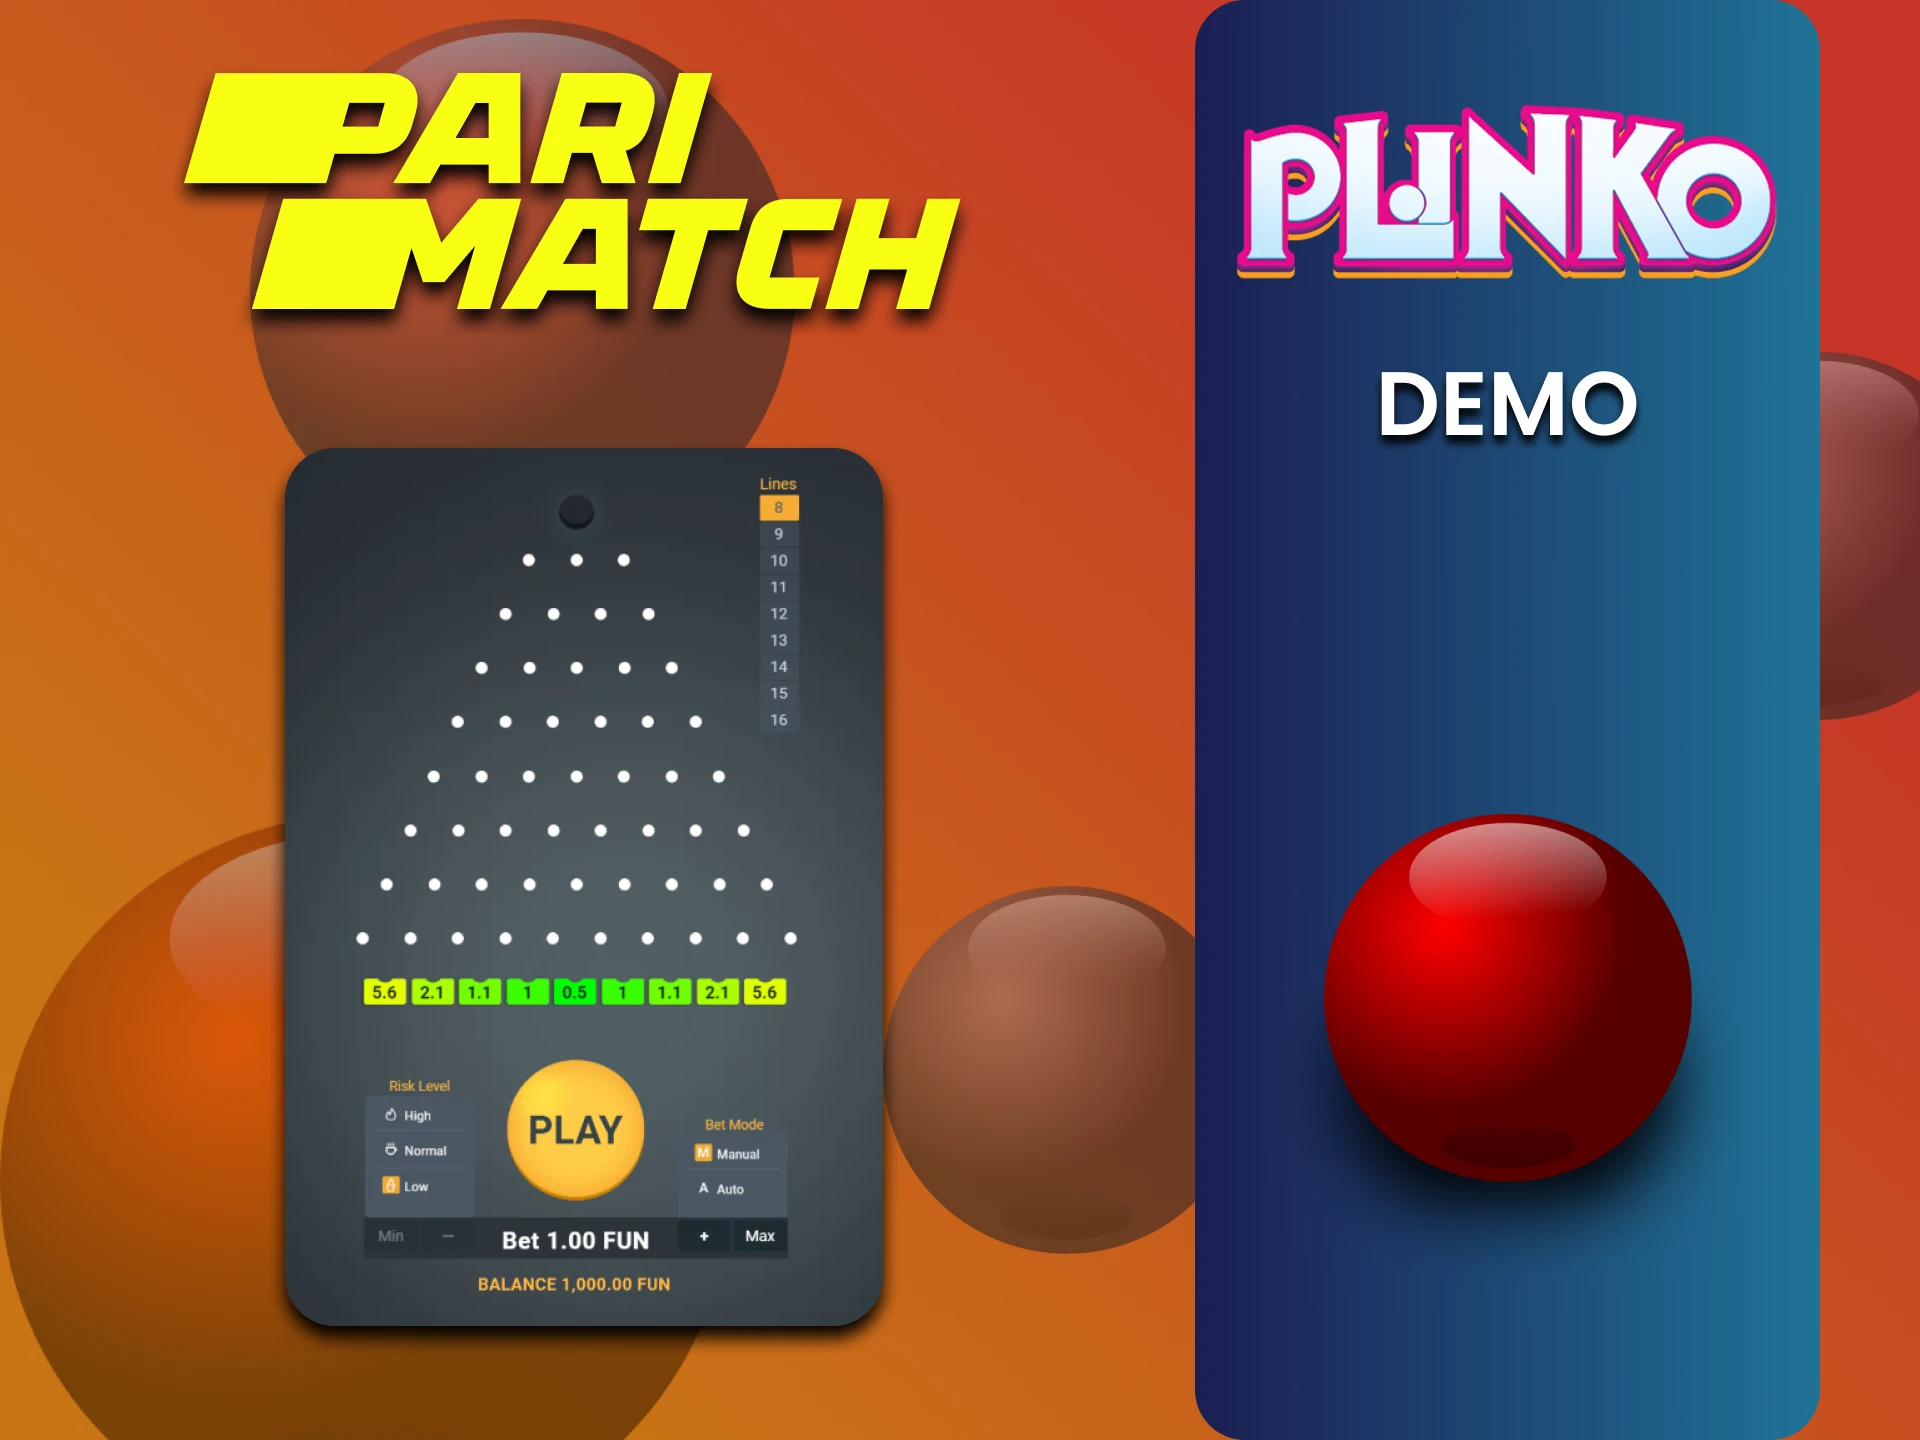 Choose a demo version of the Plinko game for training on Parimatch.